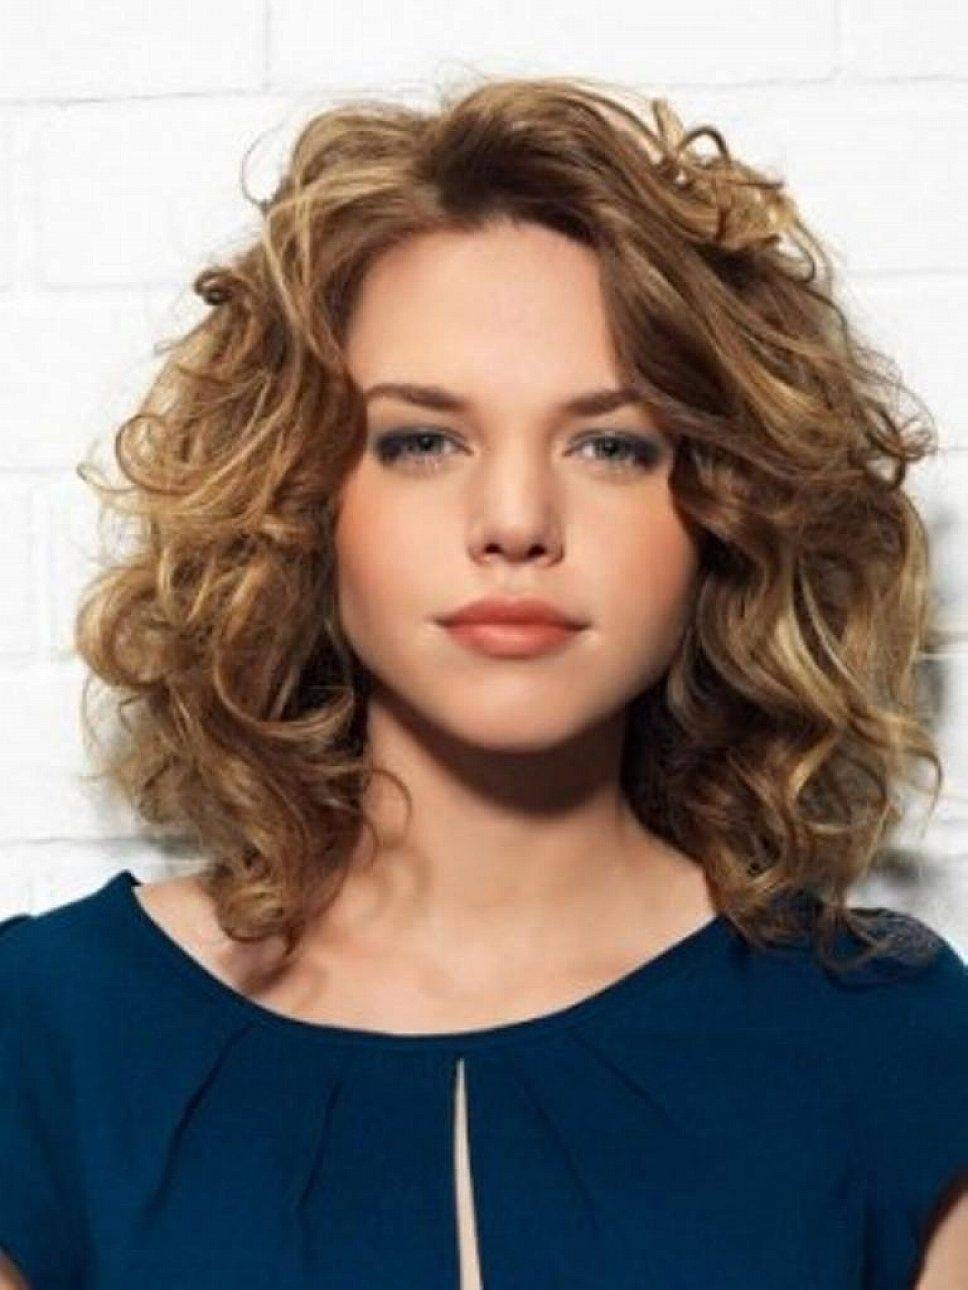 Curly Hairstyle For Chubby Face - Hairstyle with regard to Curly Hairstyle For Chubby Face